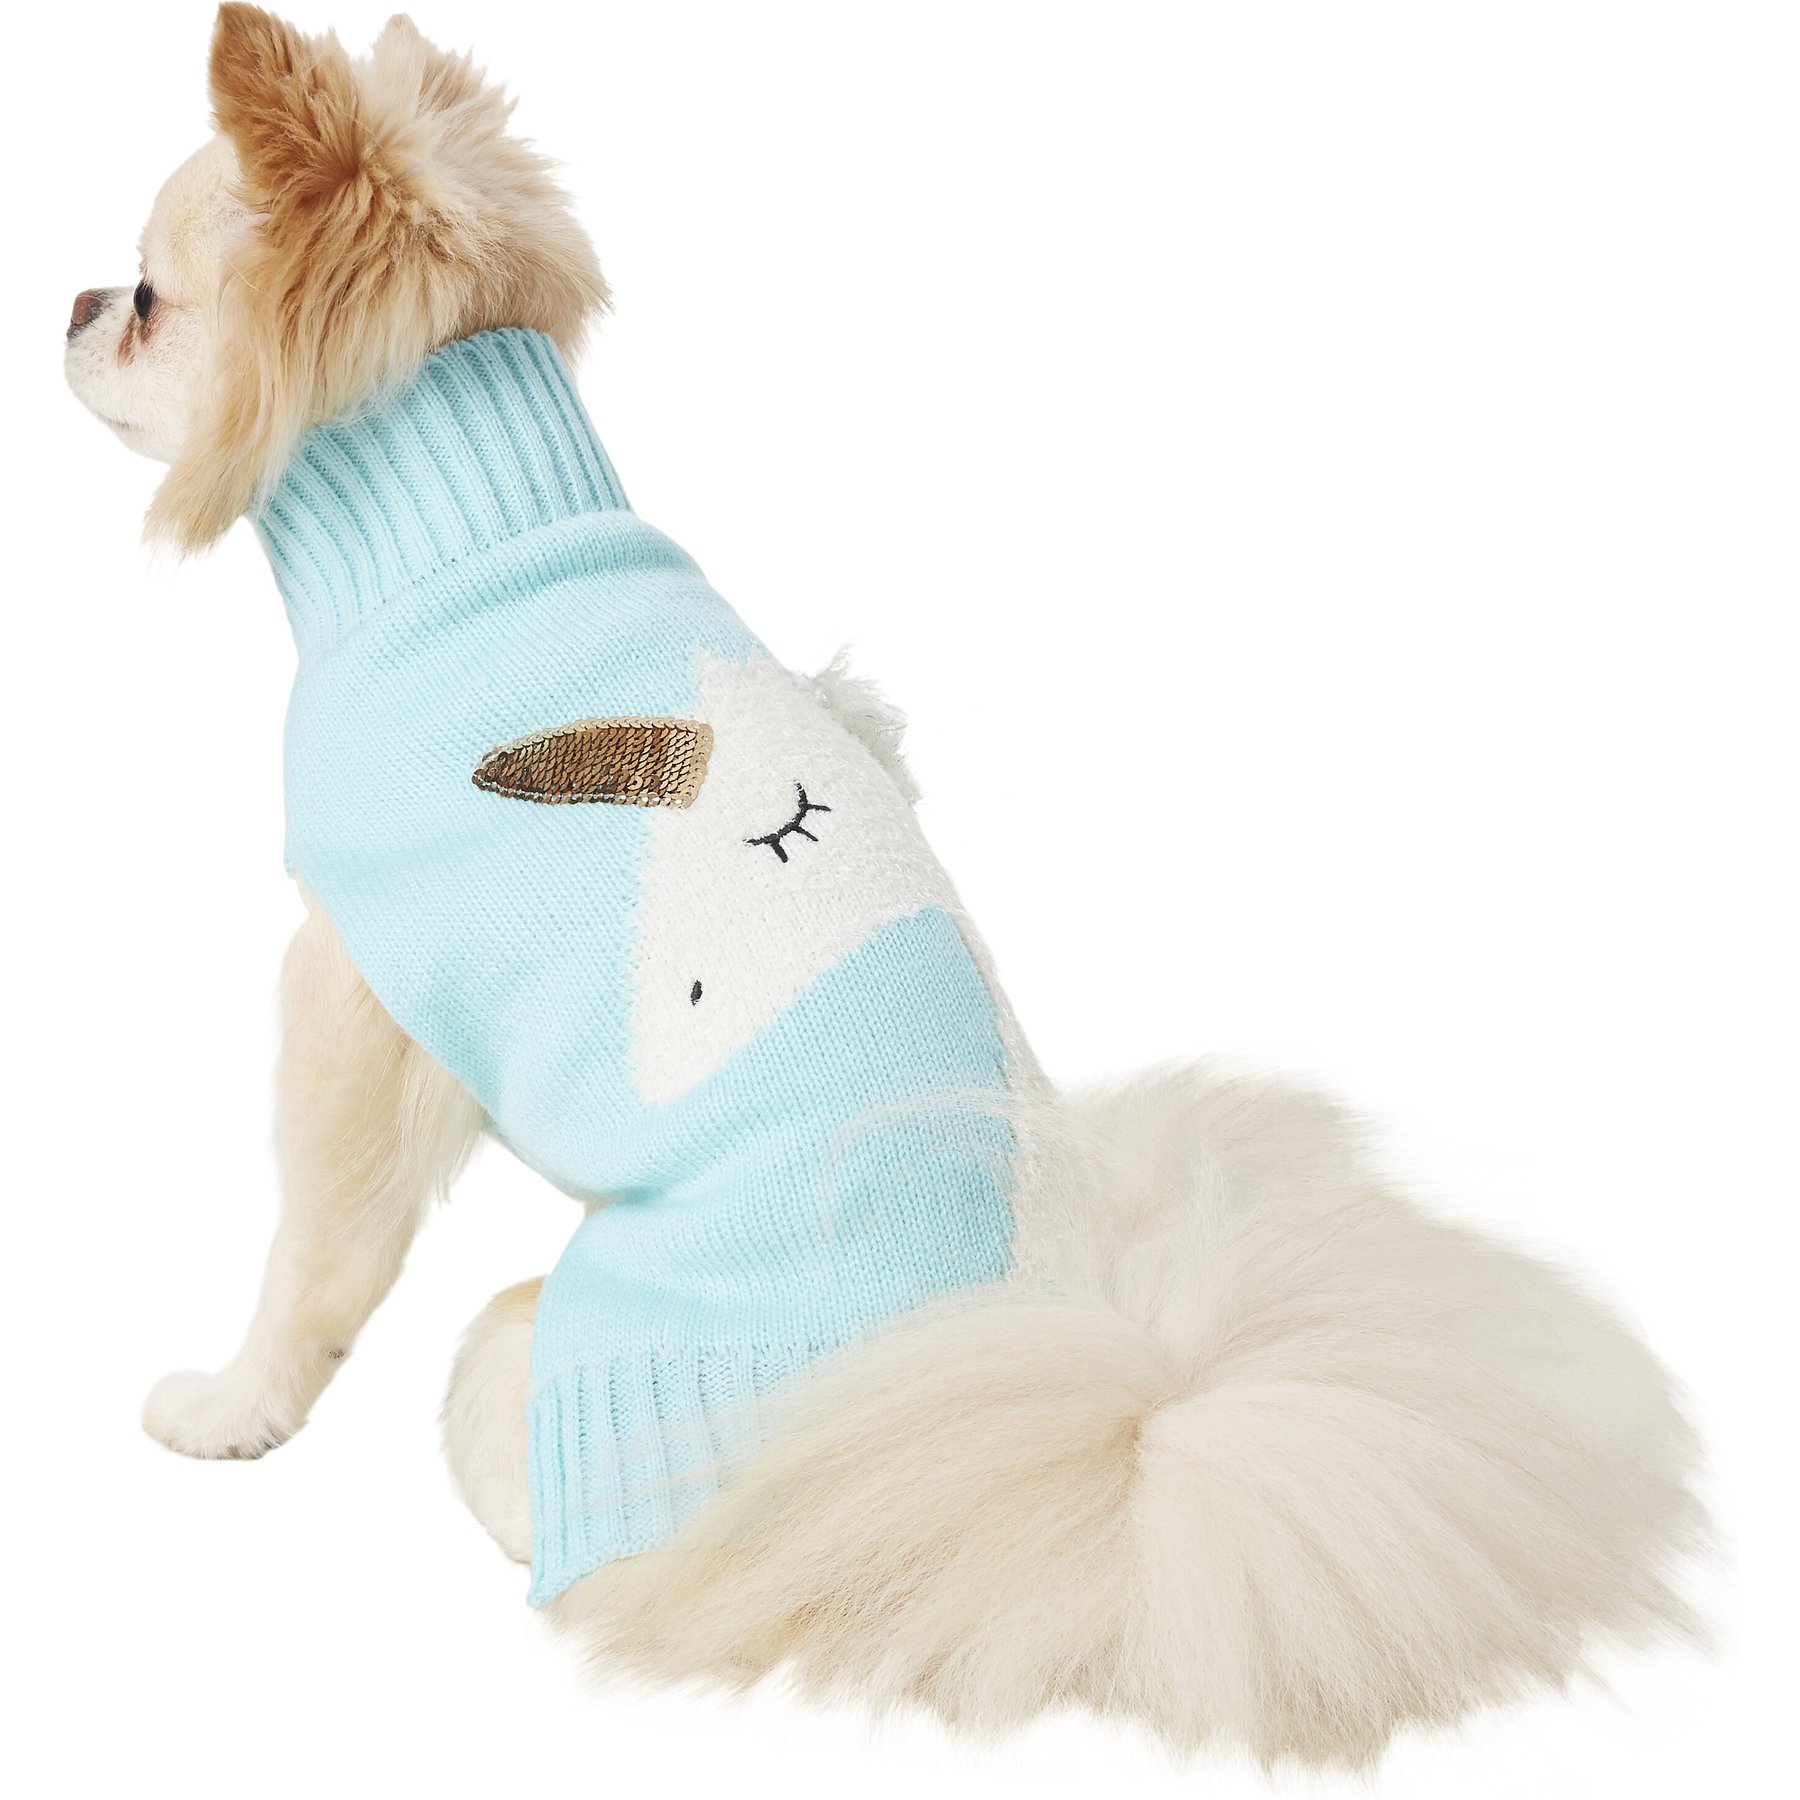  Garronmavis Blue Galaxy Puppy Dog Hoodie Starry Sky Cotton Pet  Clothing Cat Hoodies Aesthetic Cosmic Space Fall Tracksuits Outfit for Dogs  Cats Puppy Small Medium - M : Pet Supplies